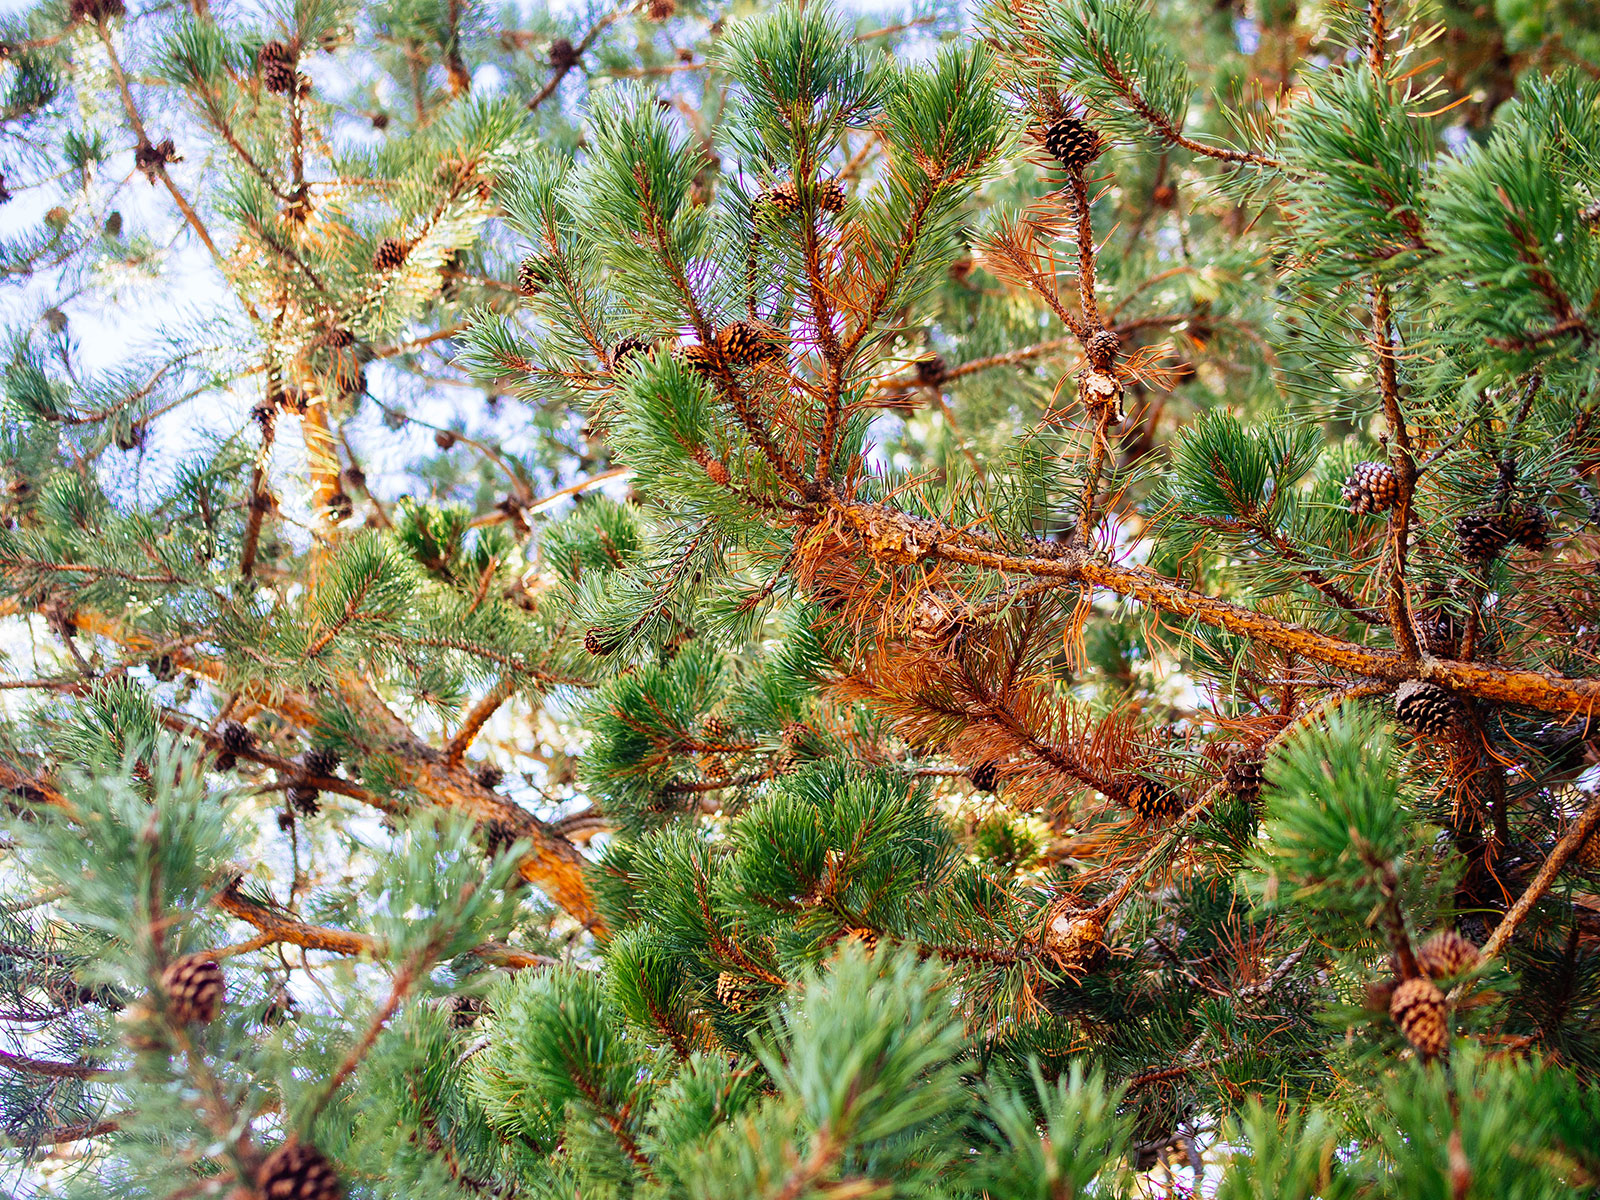 Conifer tree showing older interior needles turning brown in late summer and fall